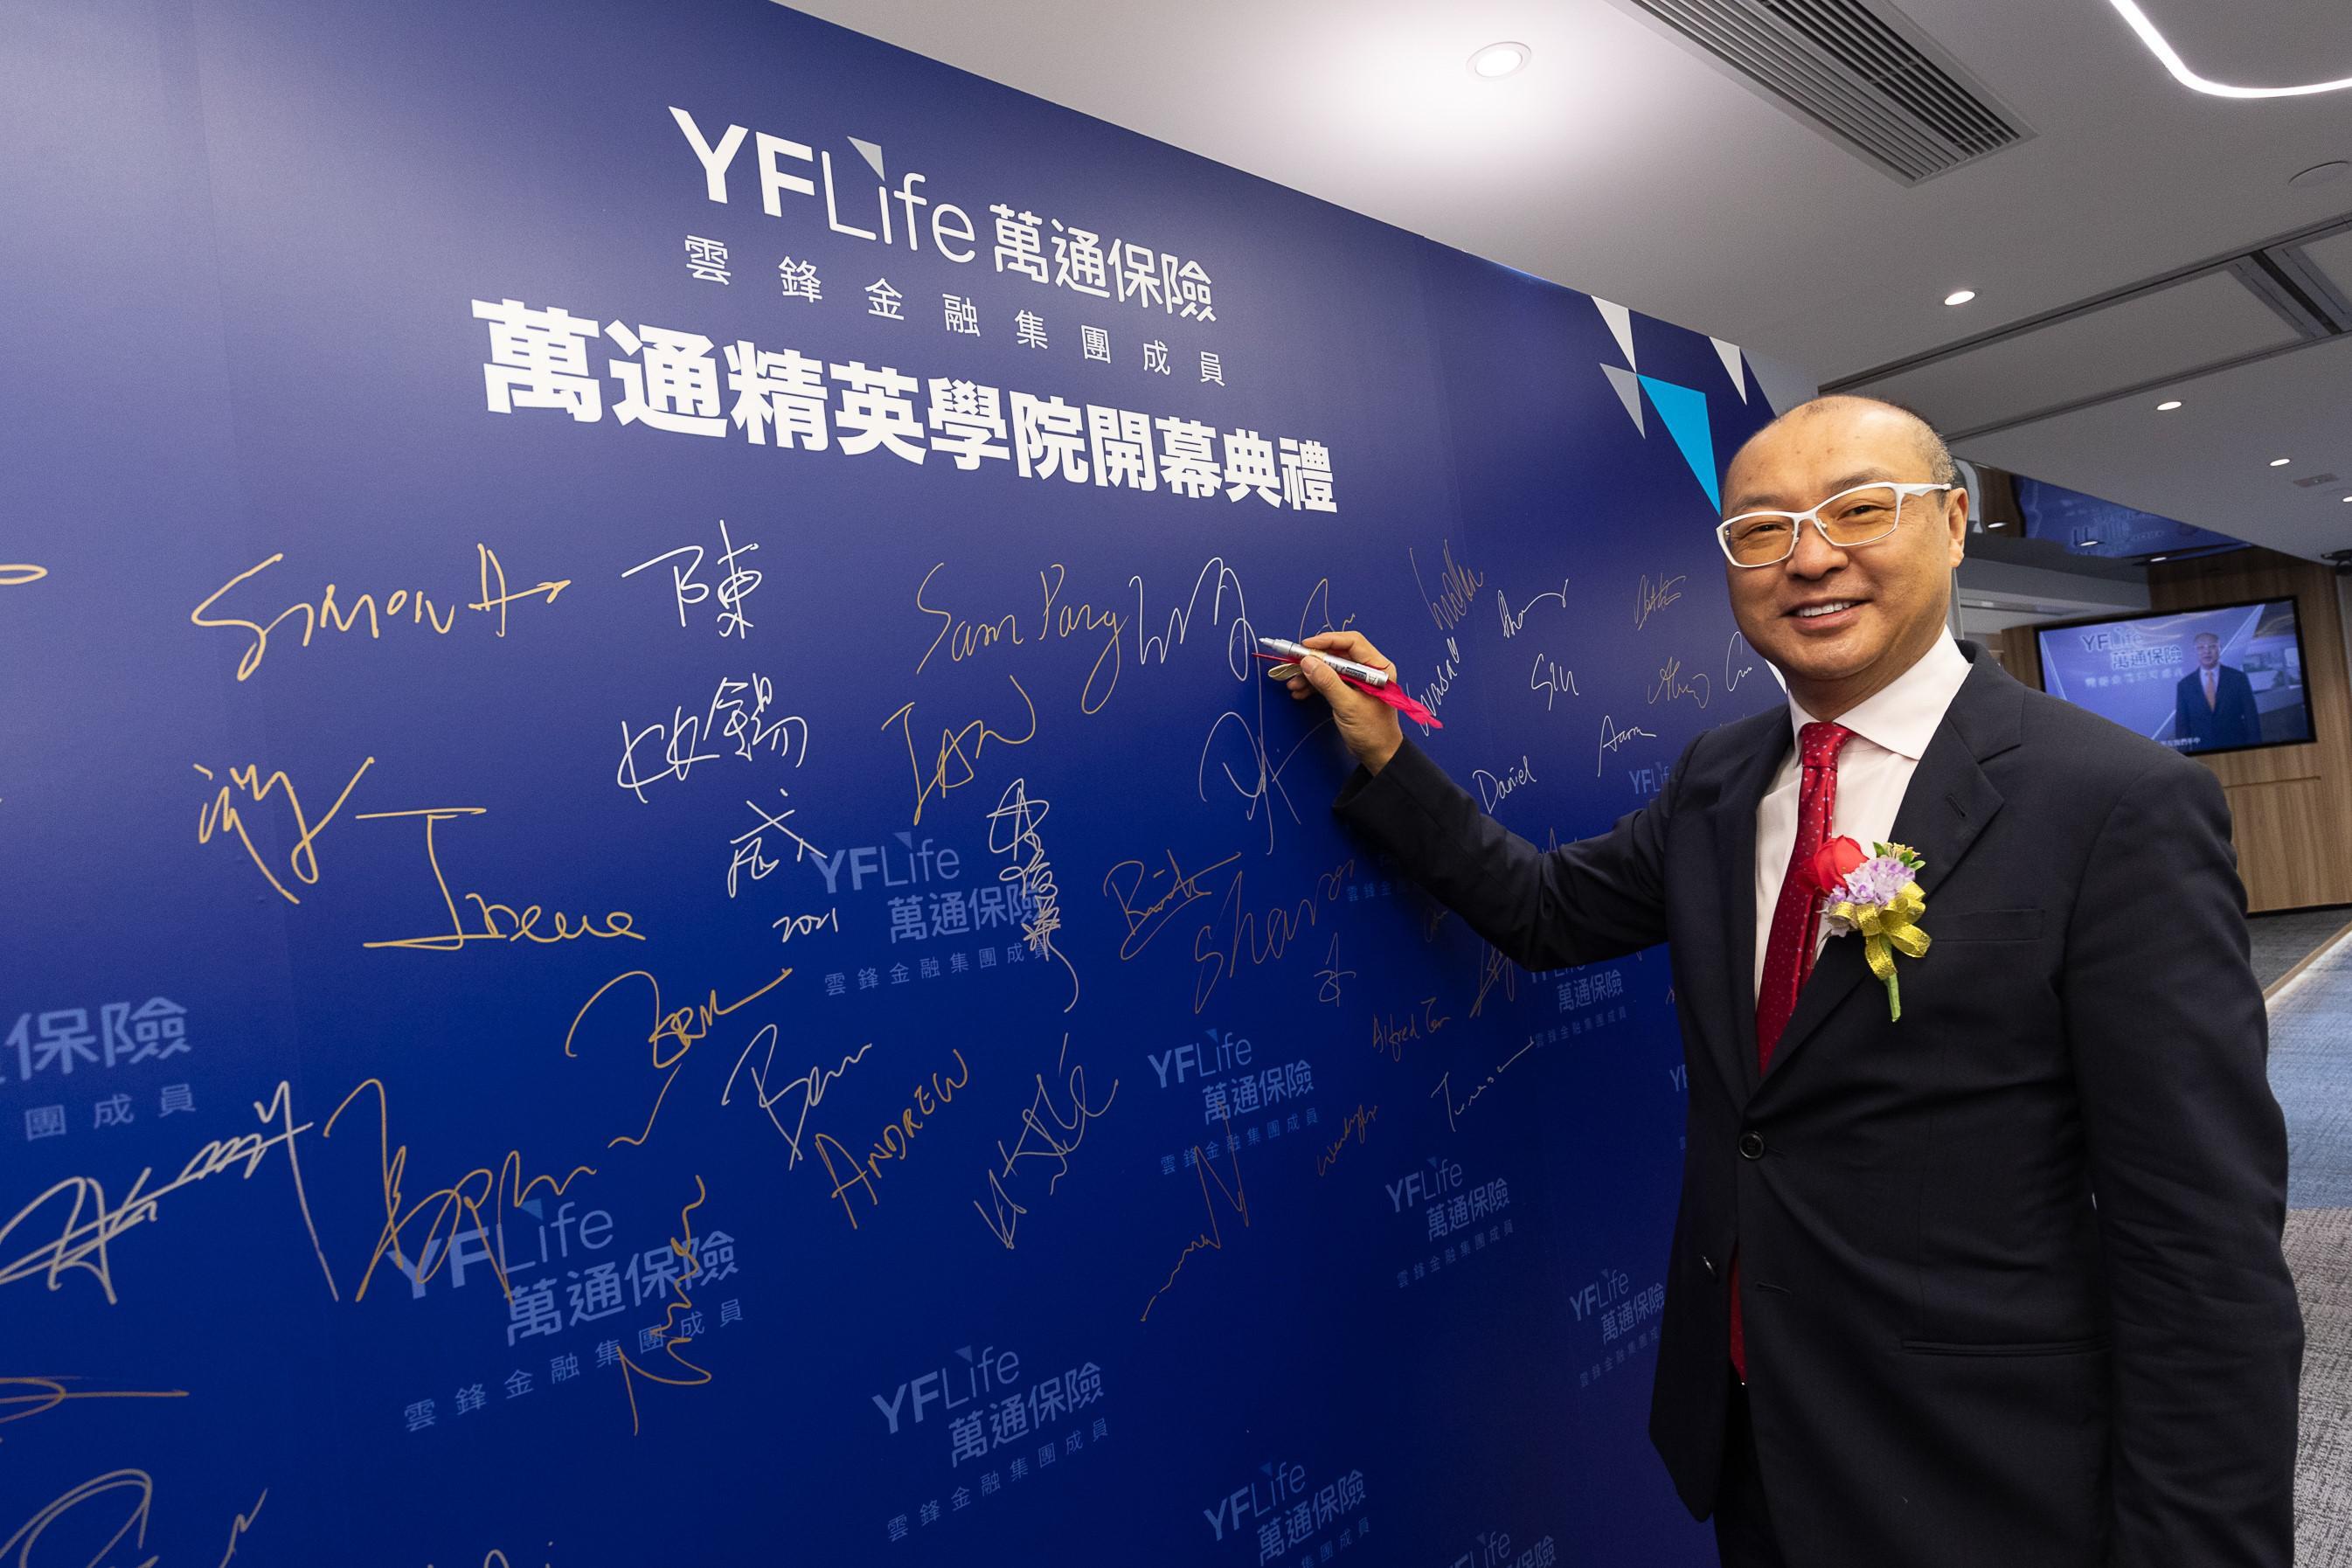 YF Life CEO Mr. Zhang Ke at the YF Academy opening ceremony